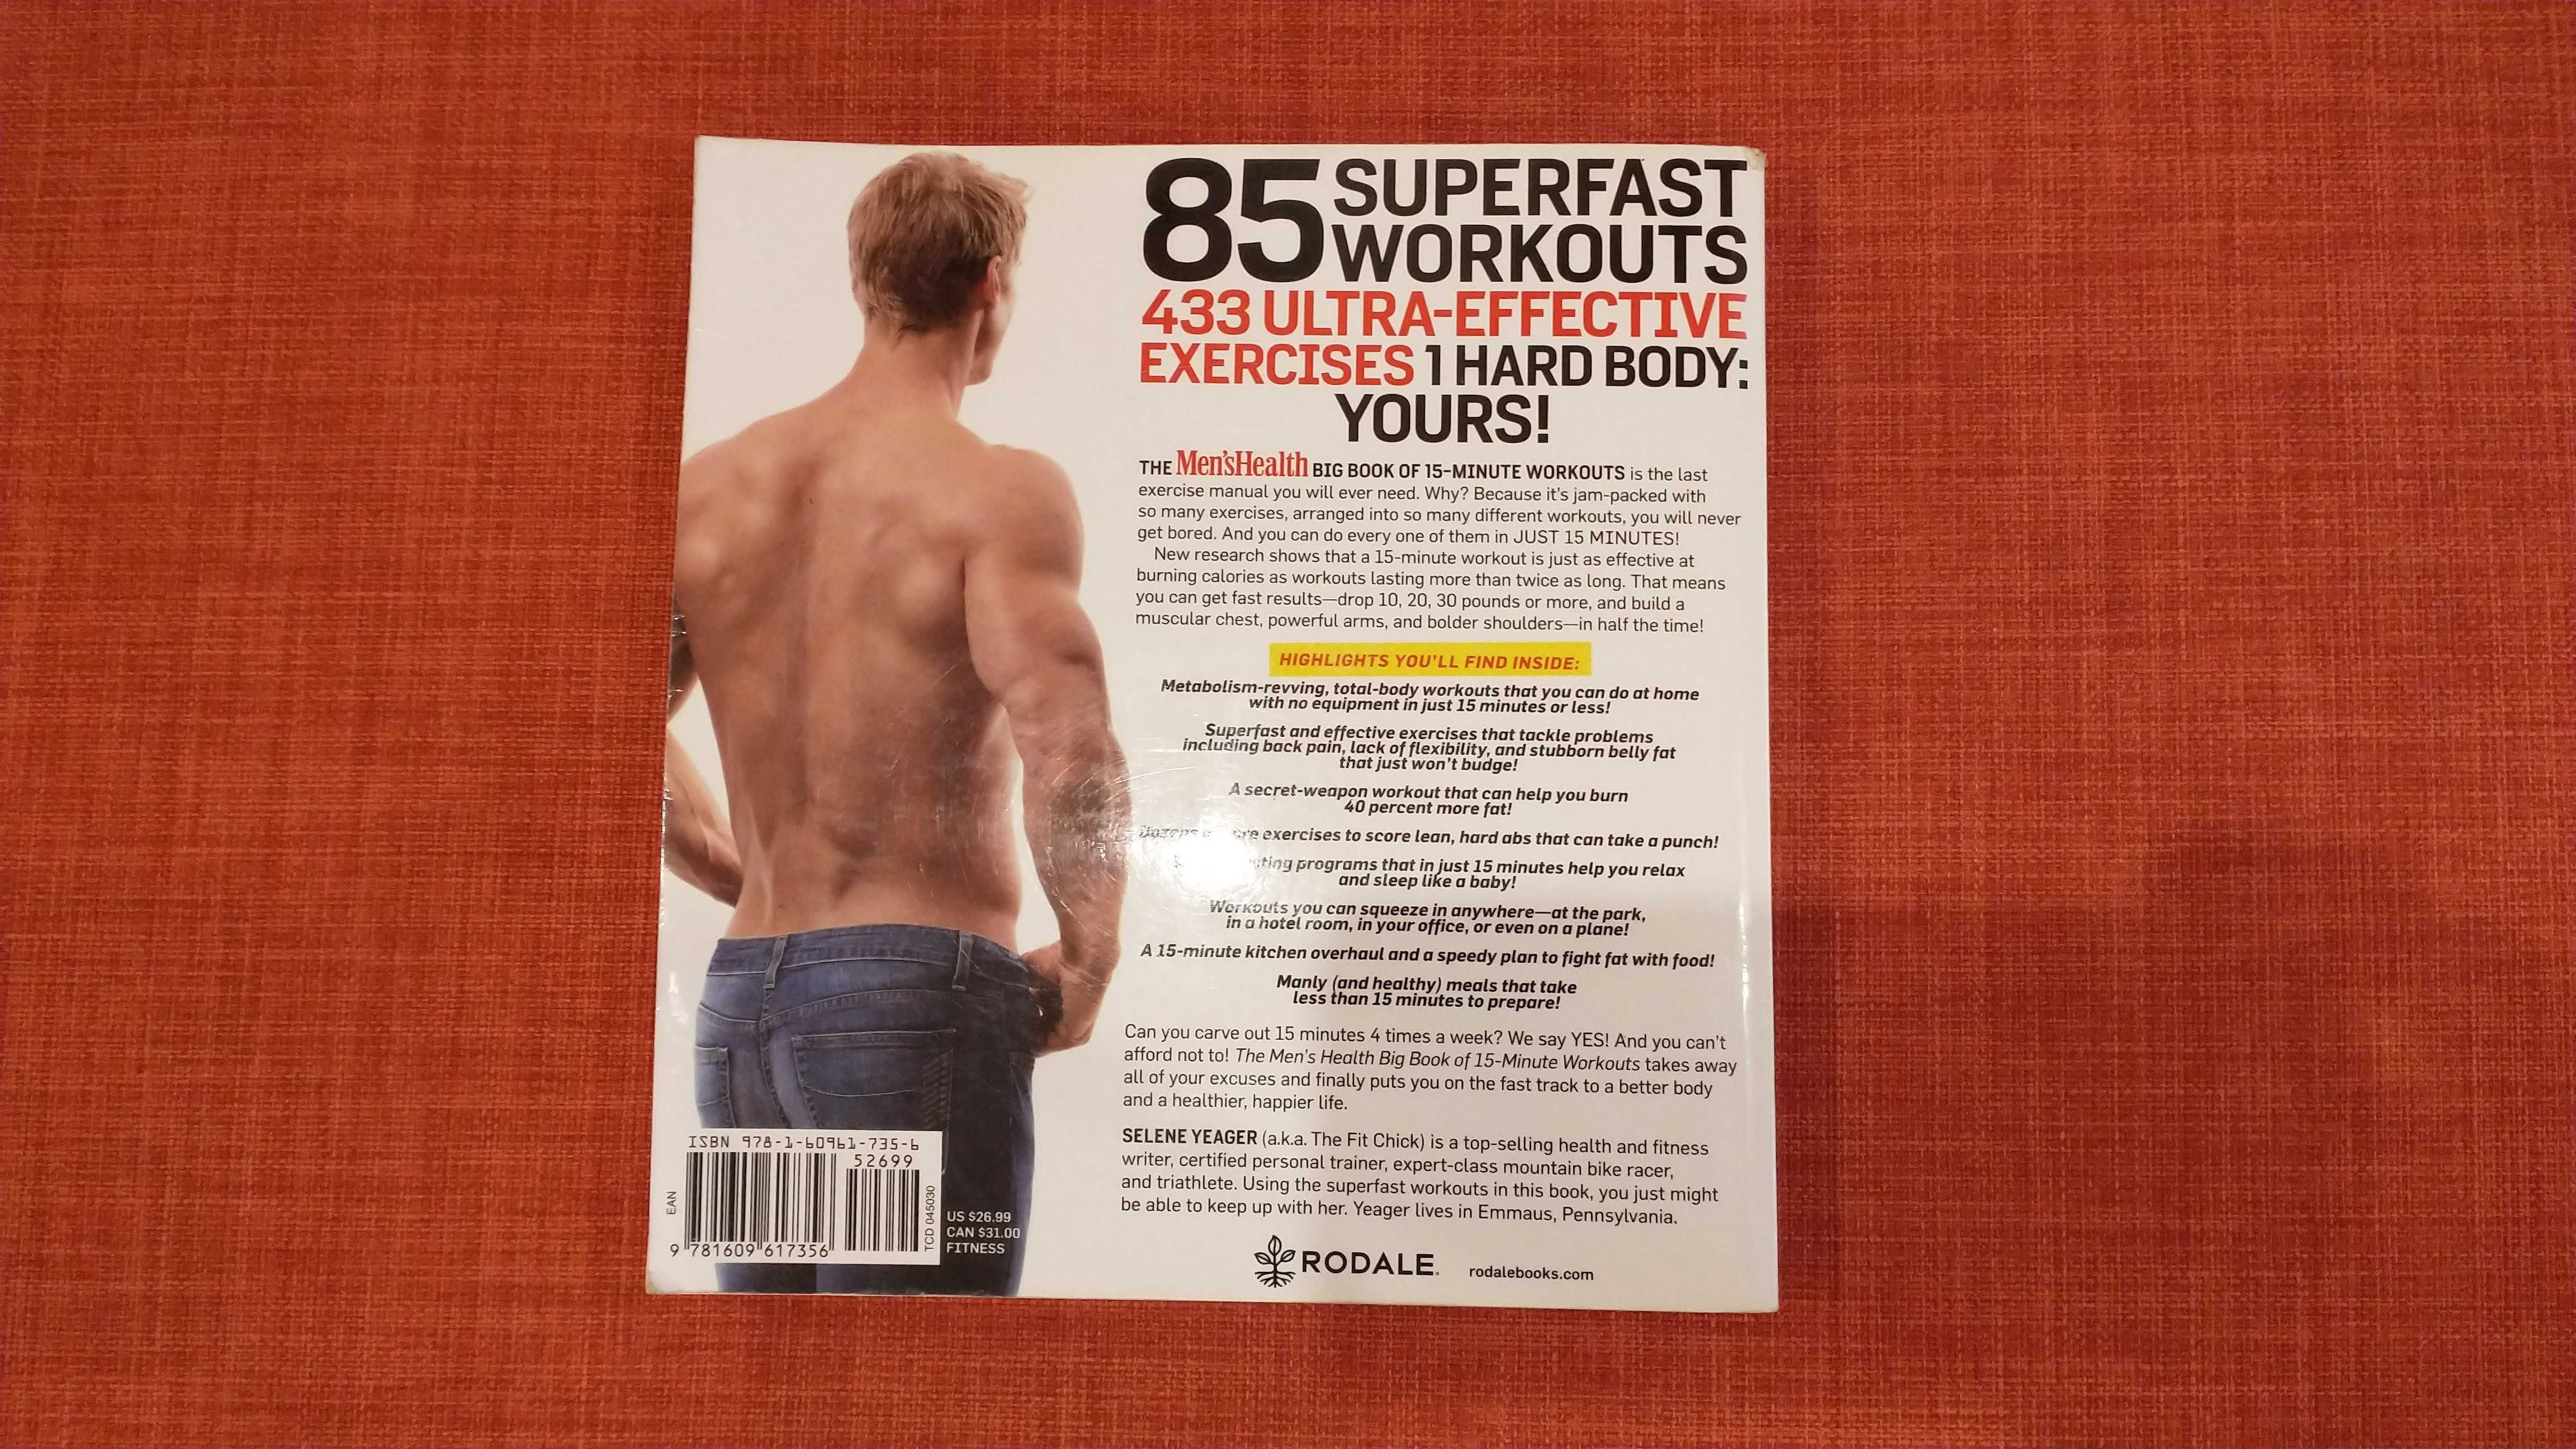 Livro "The Men's Health Big Book of 15-Minute Workouts"